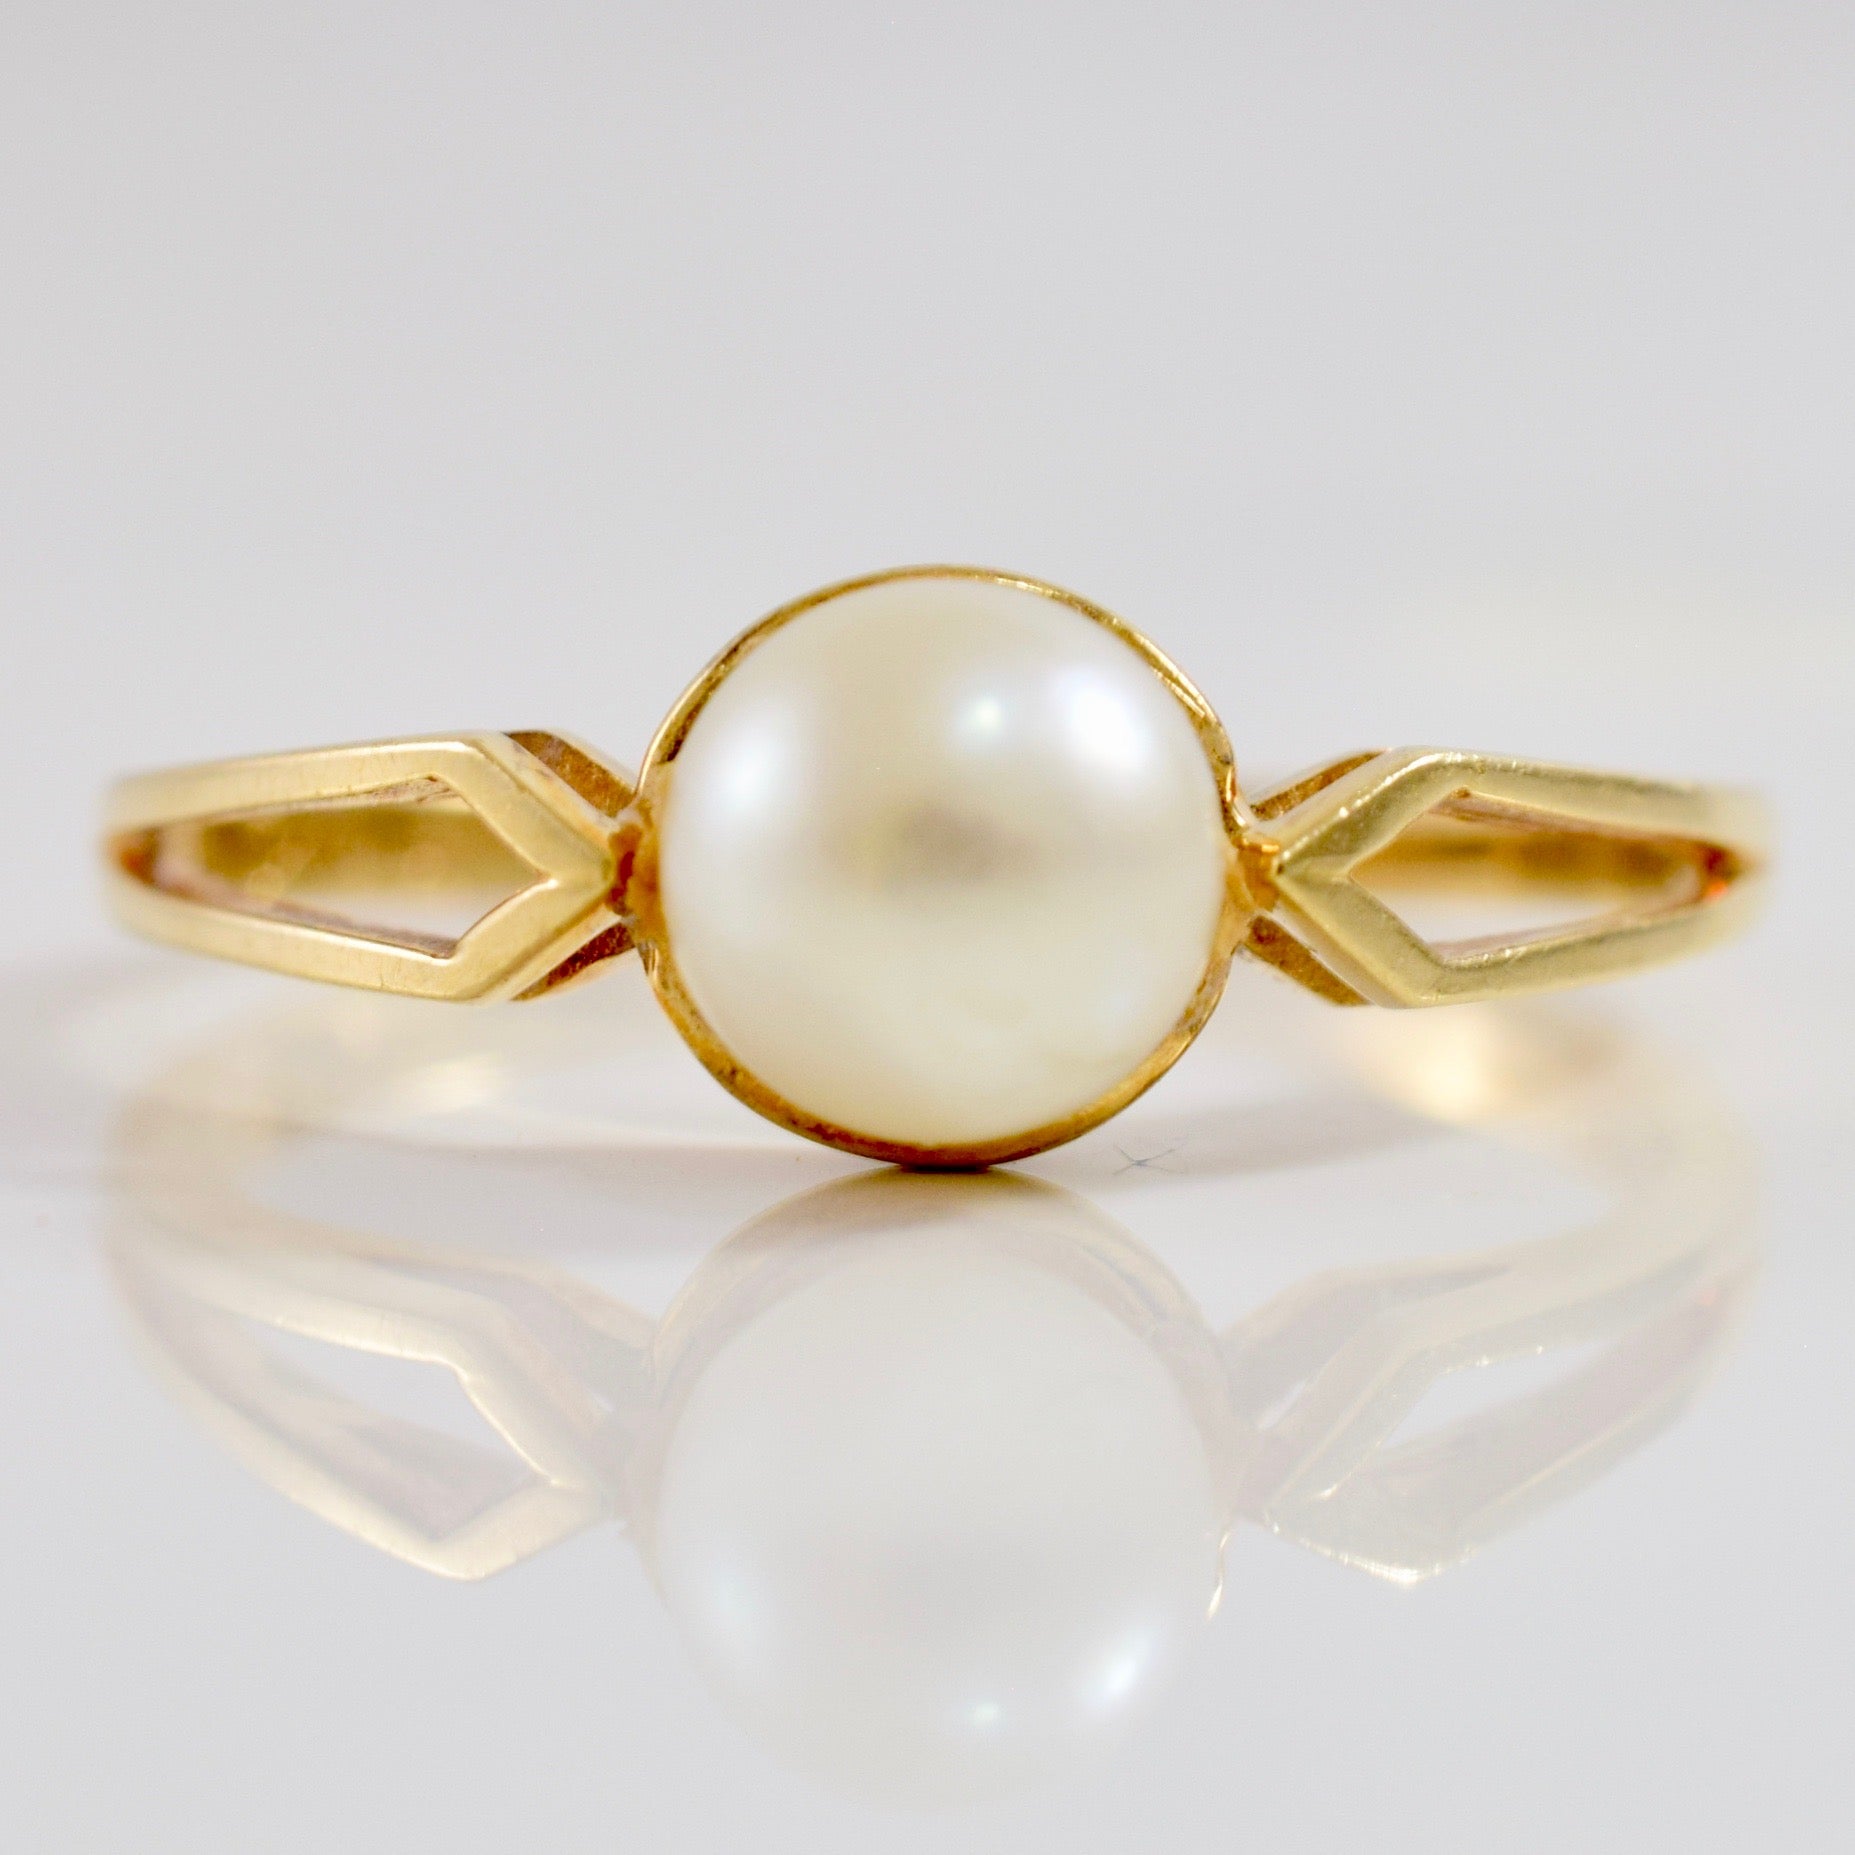 Solitaire Pearl Ring | SZ 6.5 |